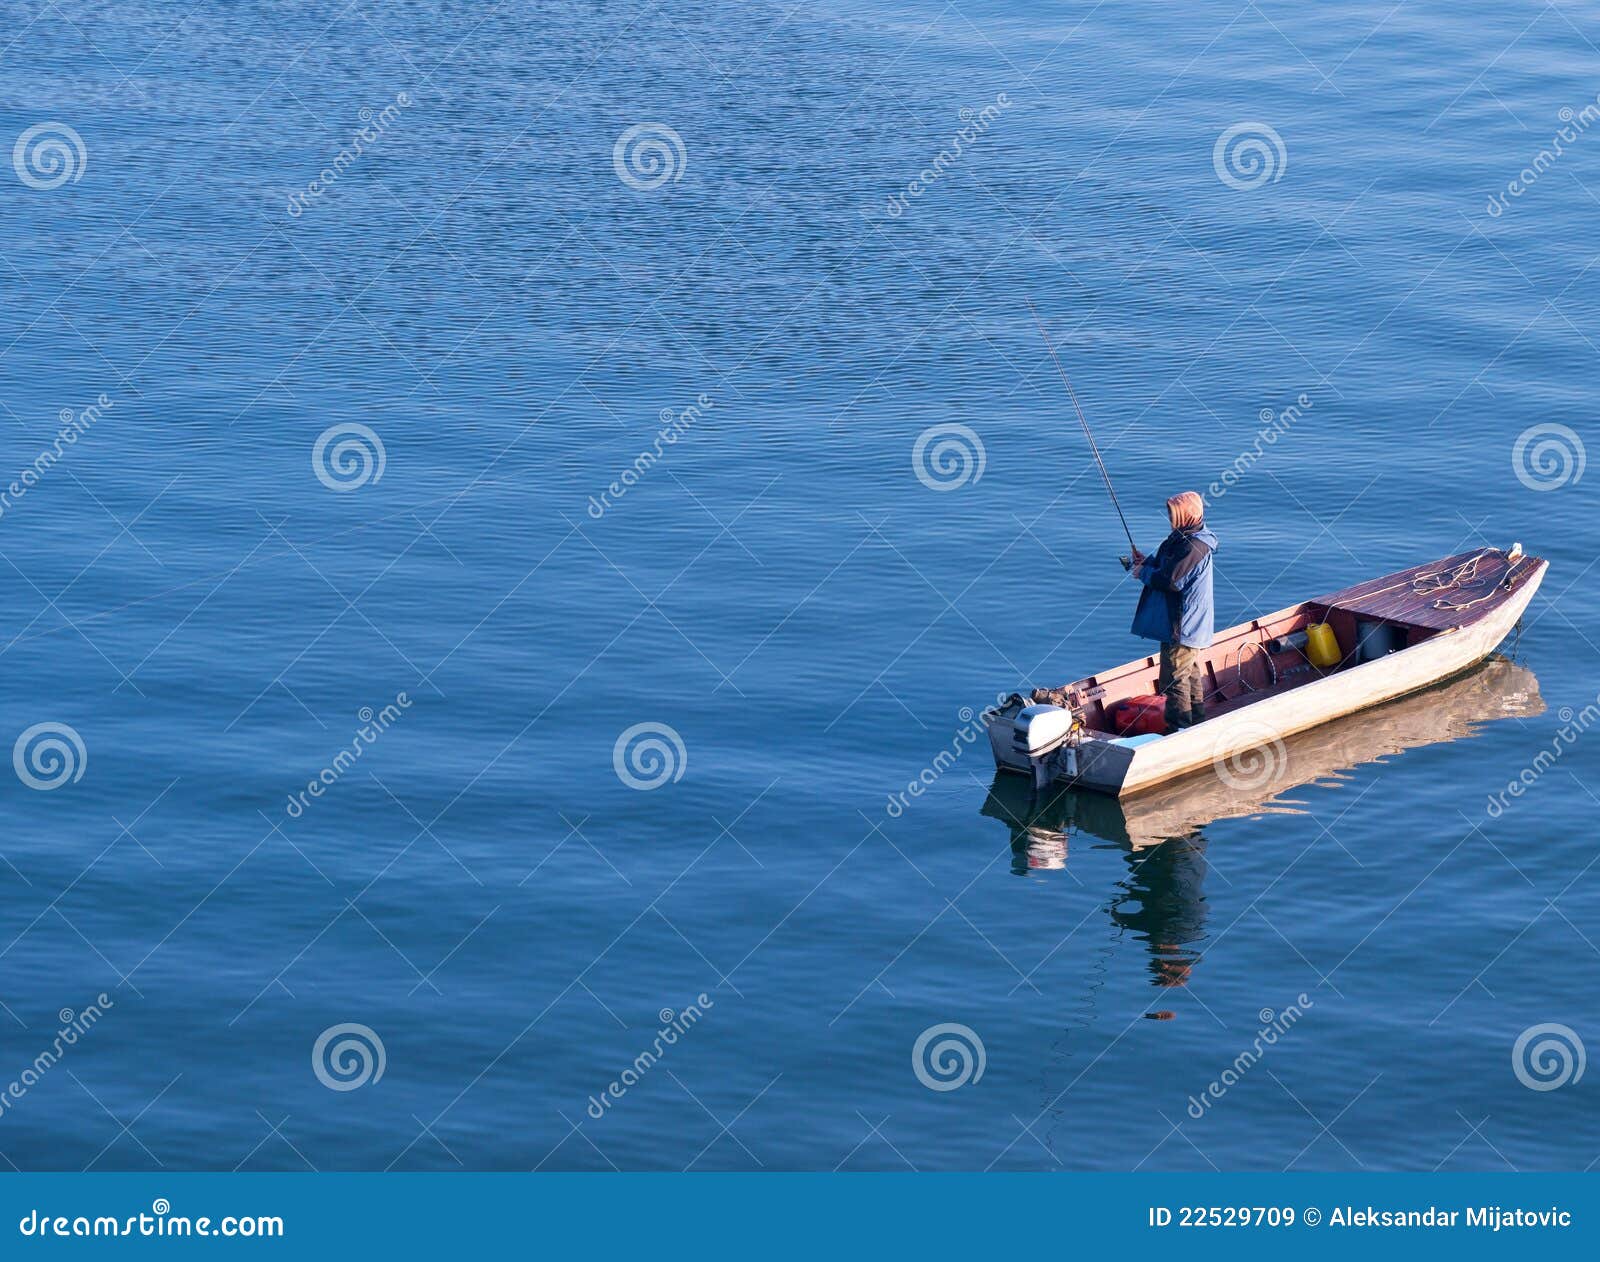 Fisherman Fishing In The Sea Royalty Free Stock Images 